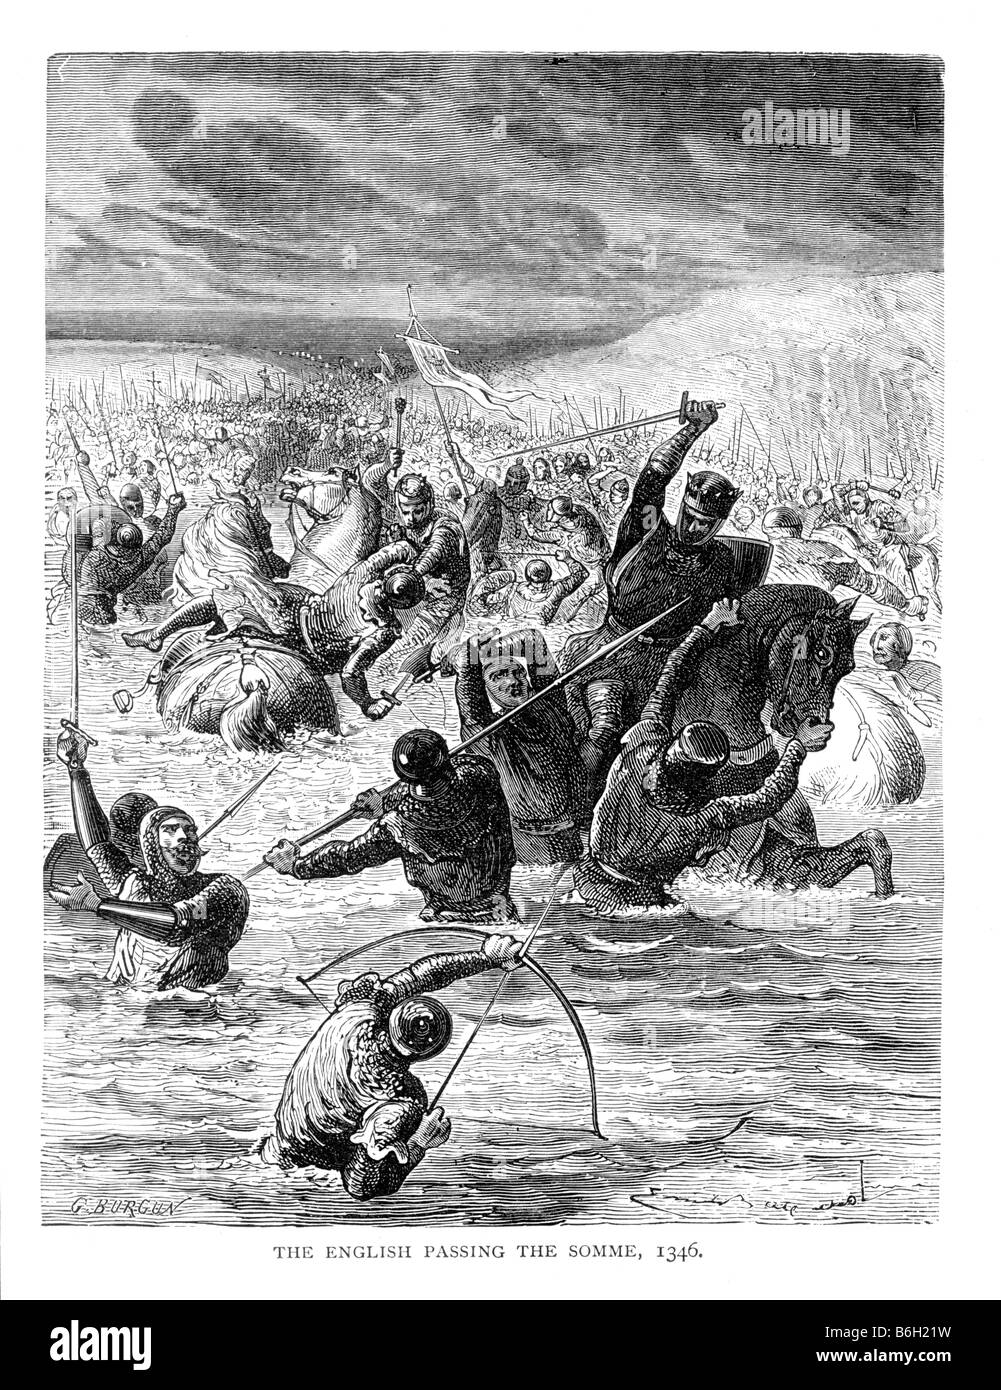 The English Passing the Somme at the Battle of Blanchetaque France 25 August 1346 19th Century Illustration Stock Photo